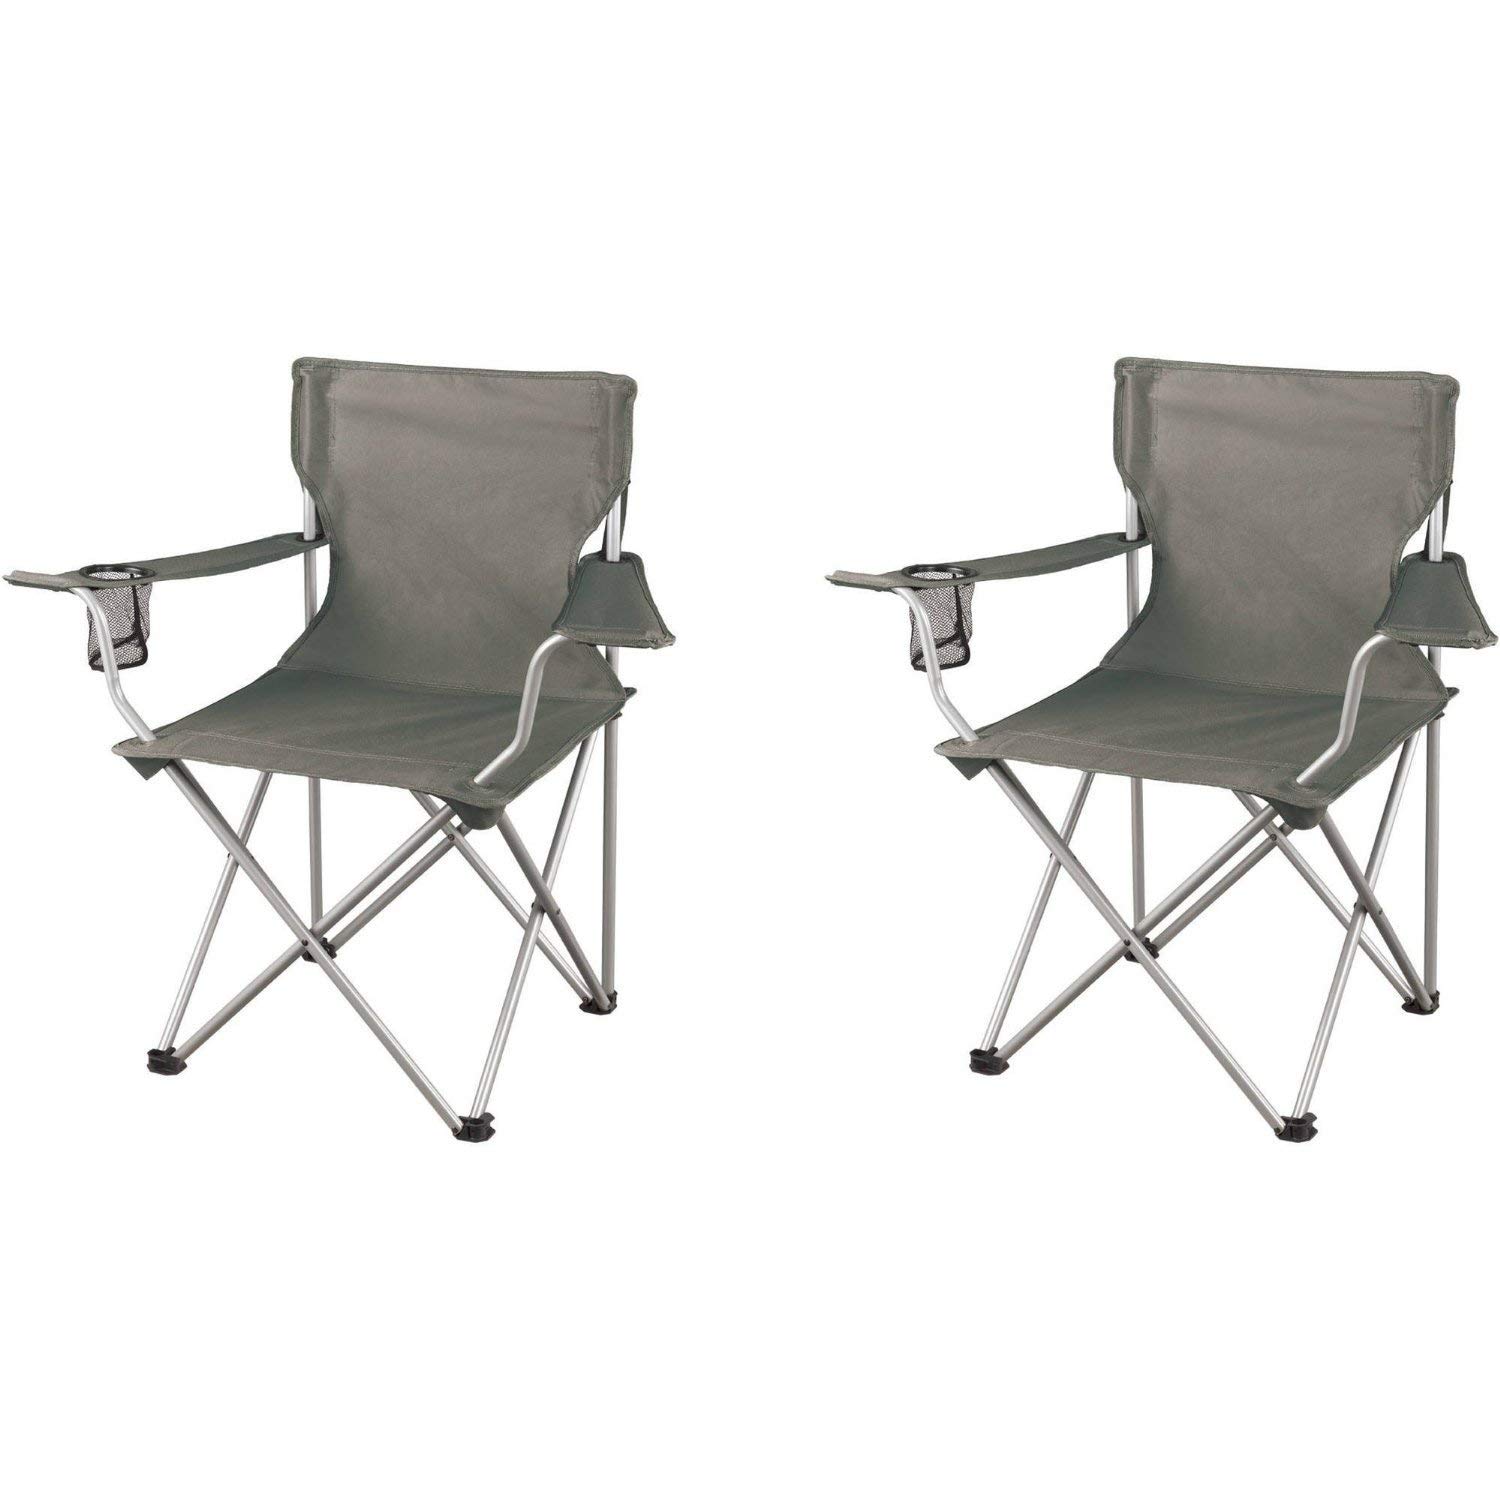 camping chairs set of 4